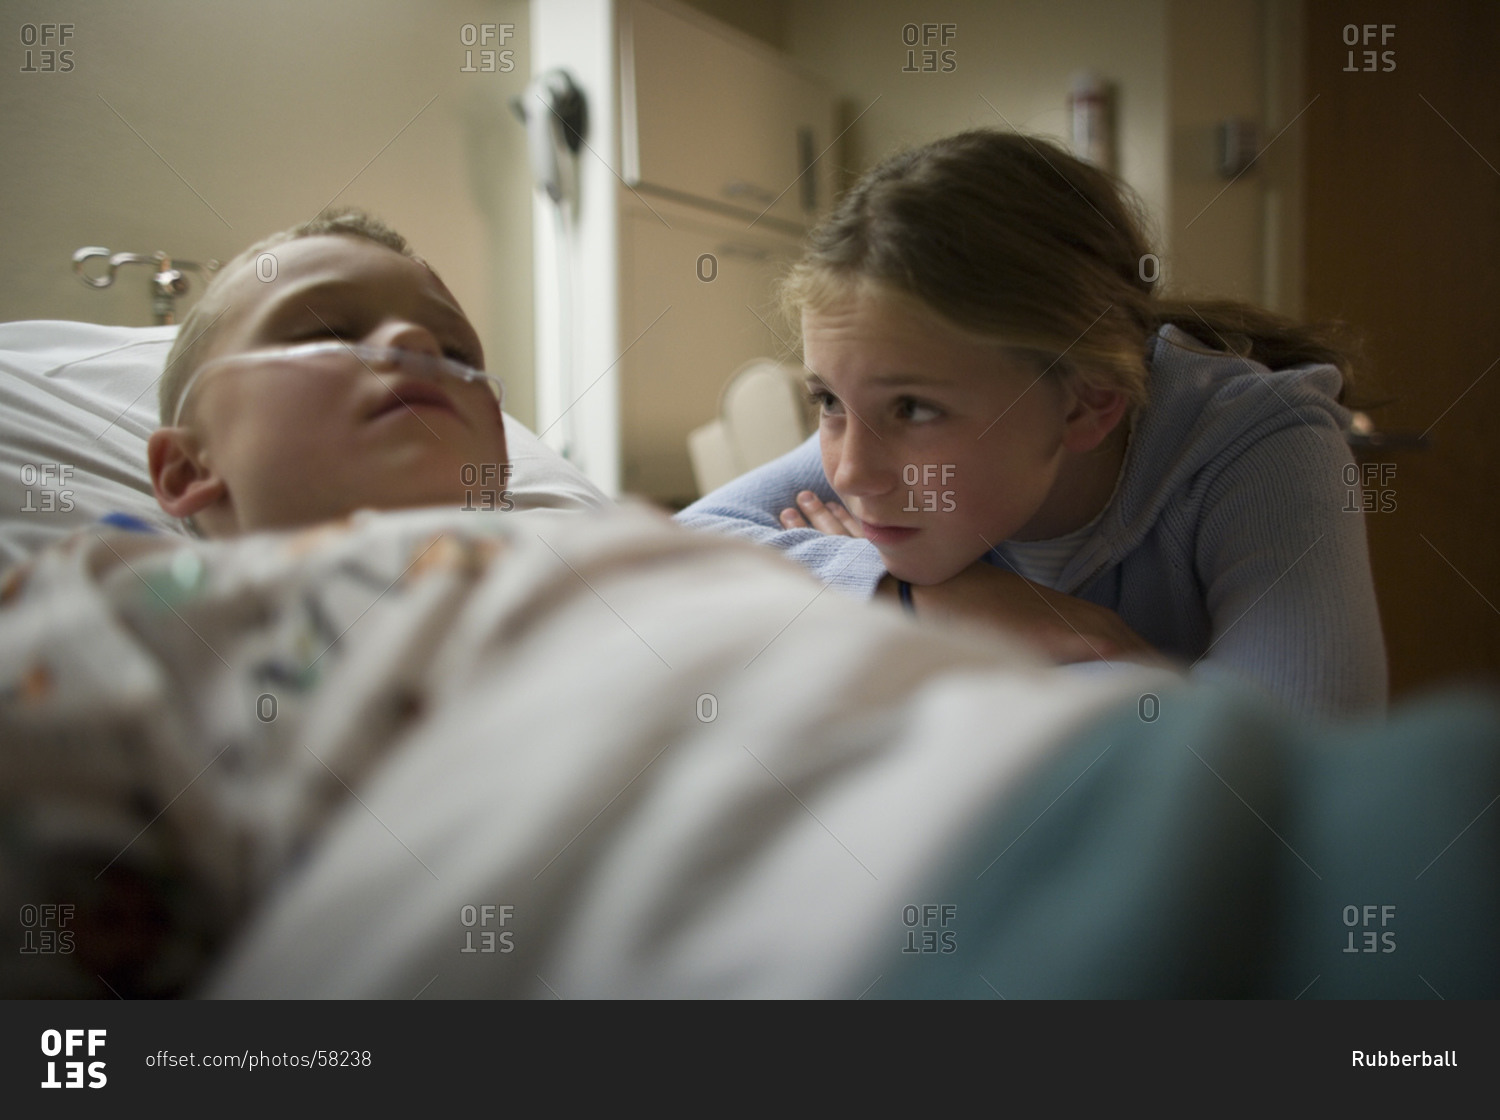 Young girl sitting by brother in hospital bed